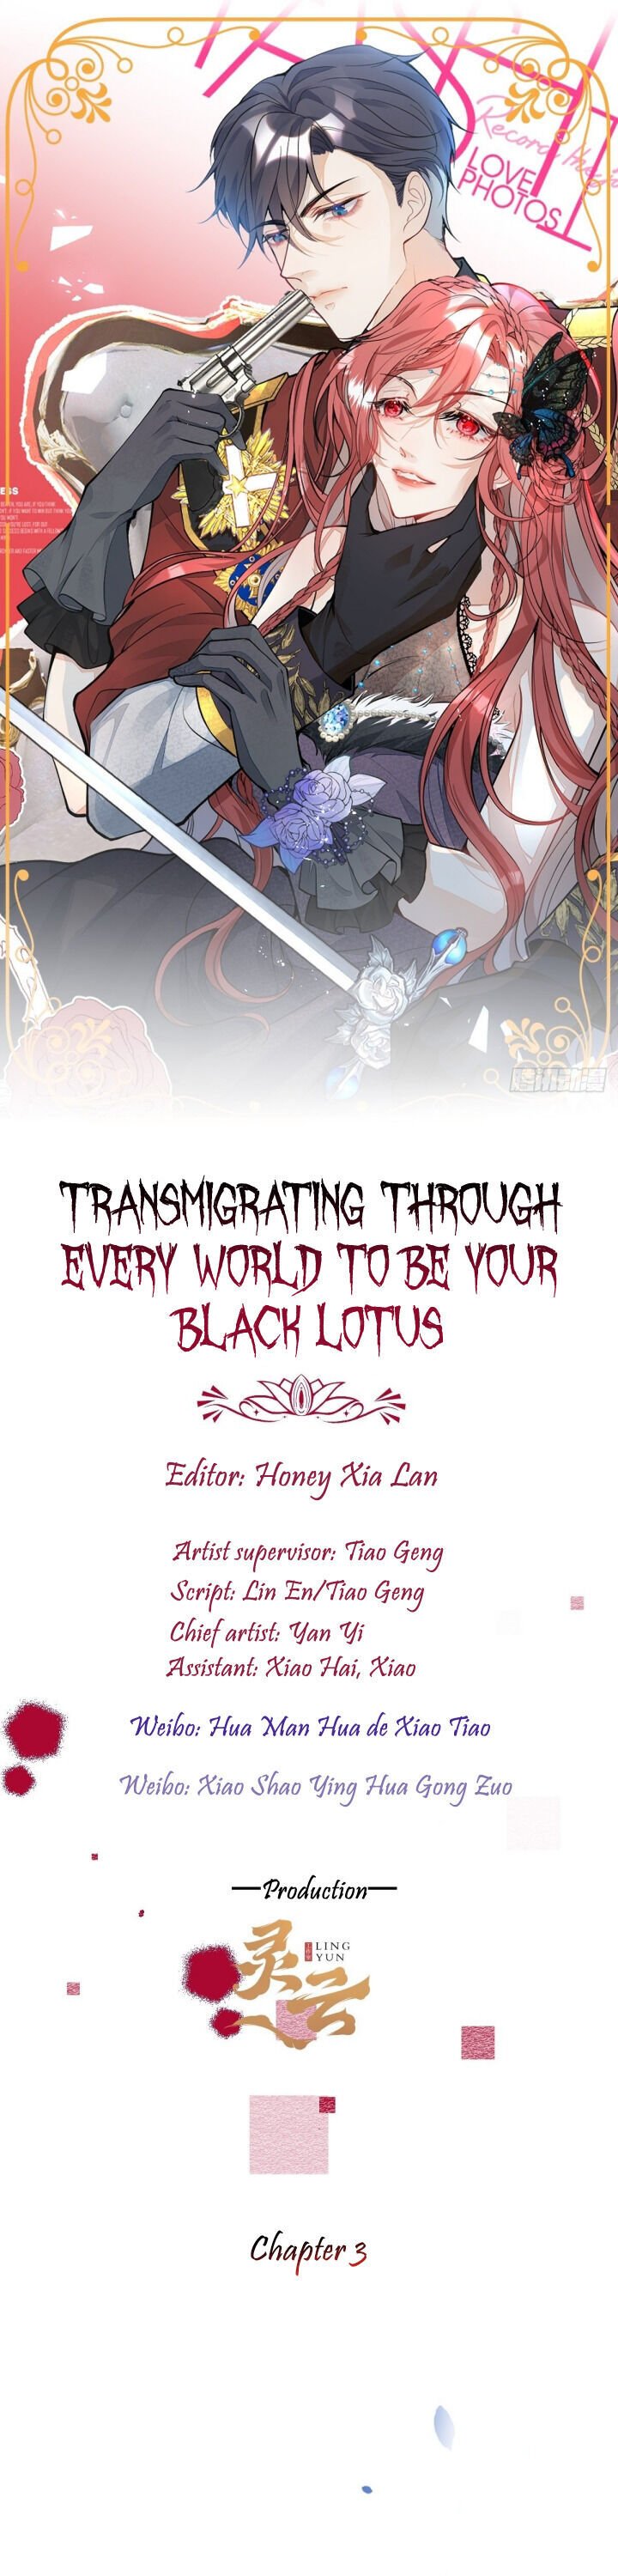 Transmigrating Through Every World to Be Your Black Lotus Chapter 3 - Page 0